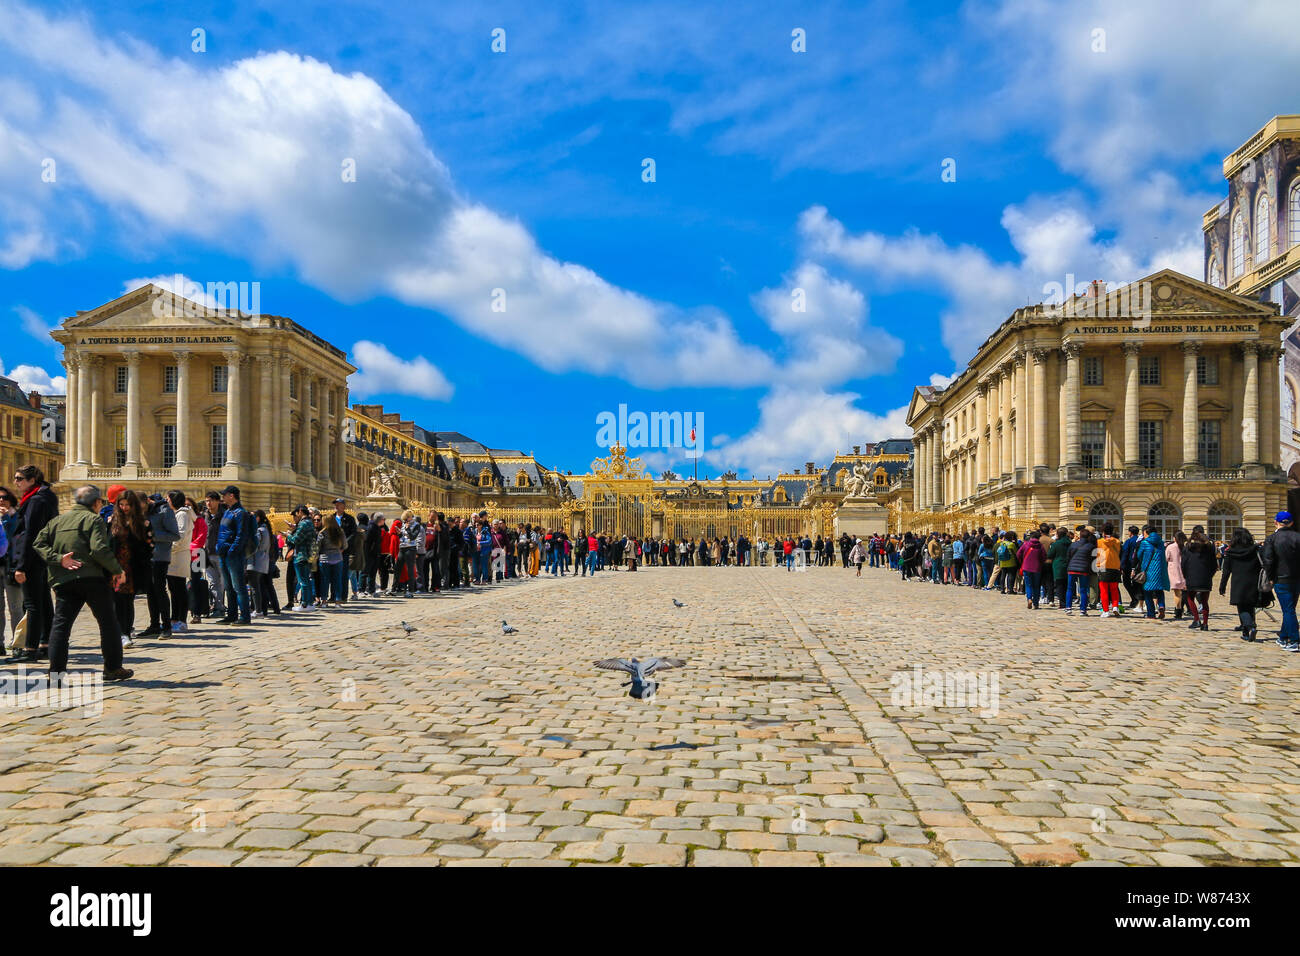 Great view of a large U-shaped queue of visitors in front of the Palace of Versailles at the golden royal gate in the cobblestoned court of honour... Stock Photo